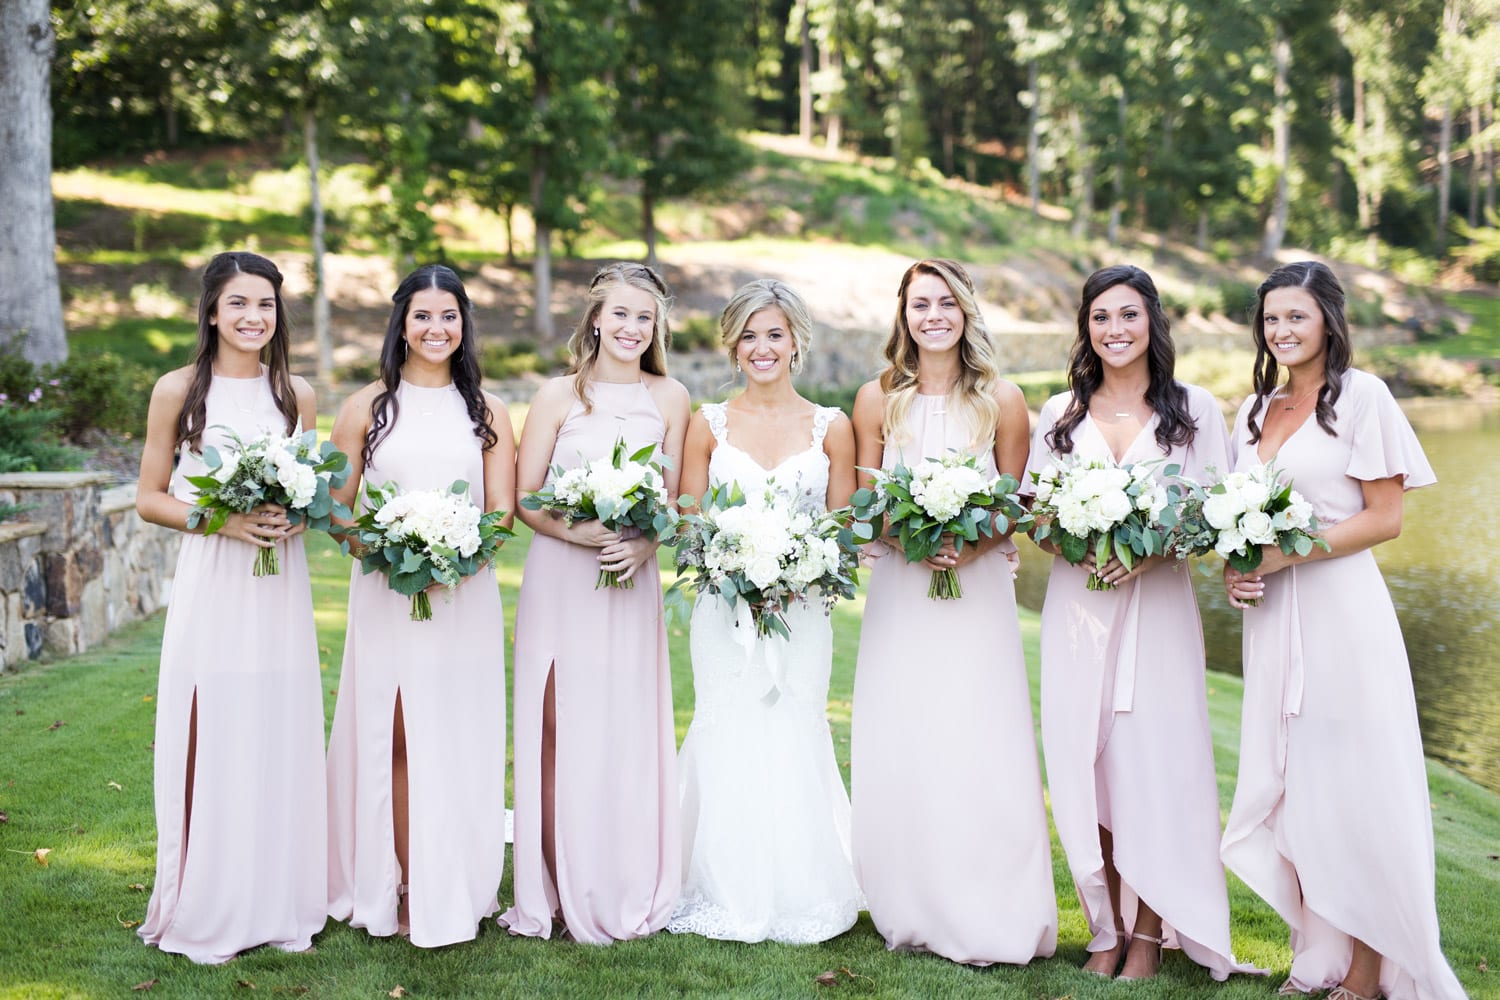 Bride and bridesmaids holding flowers outside